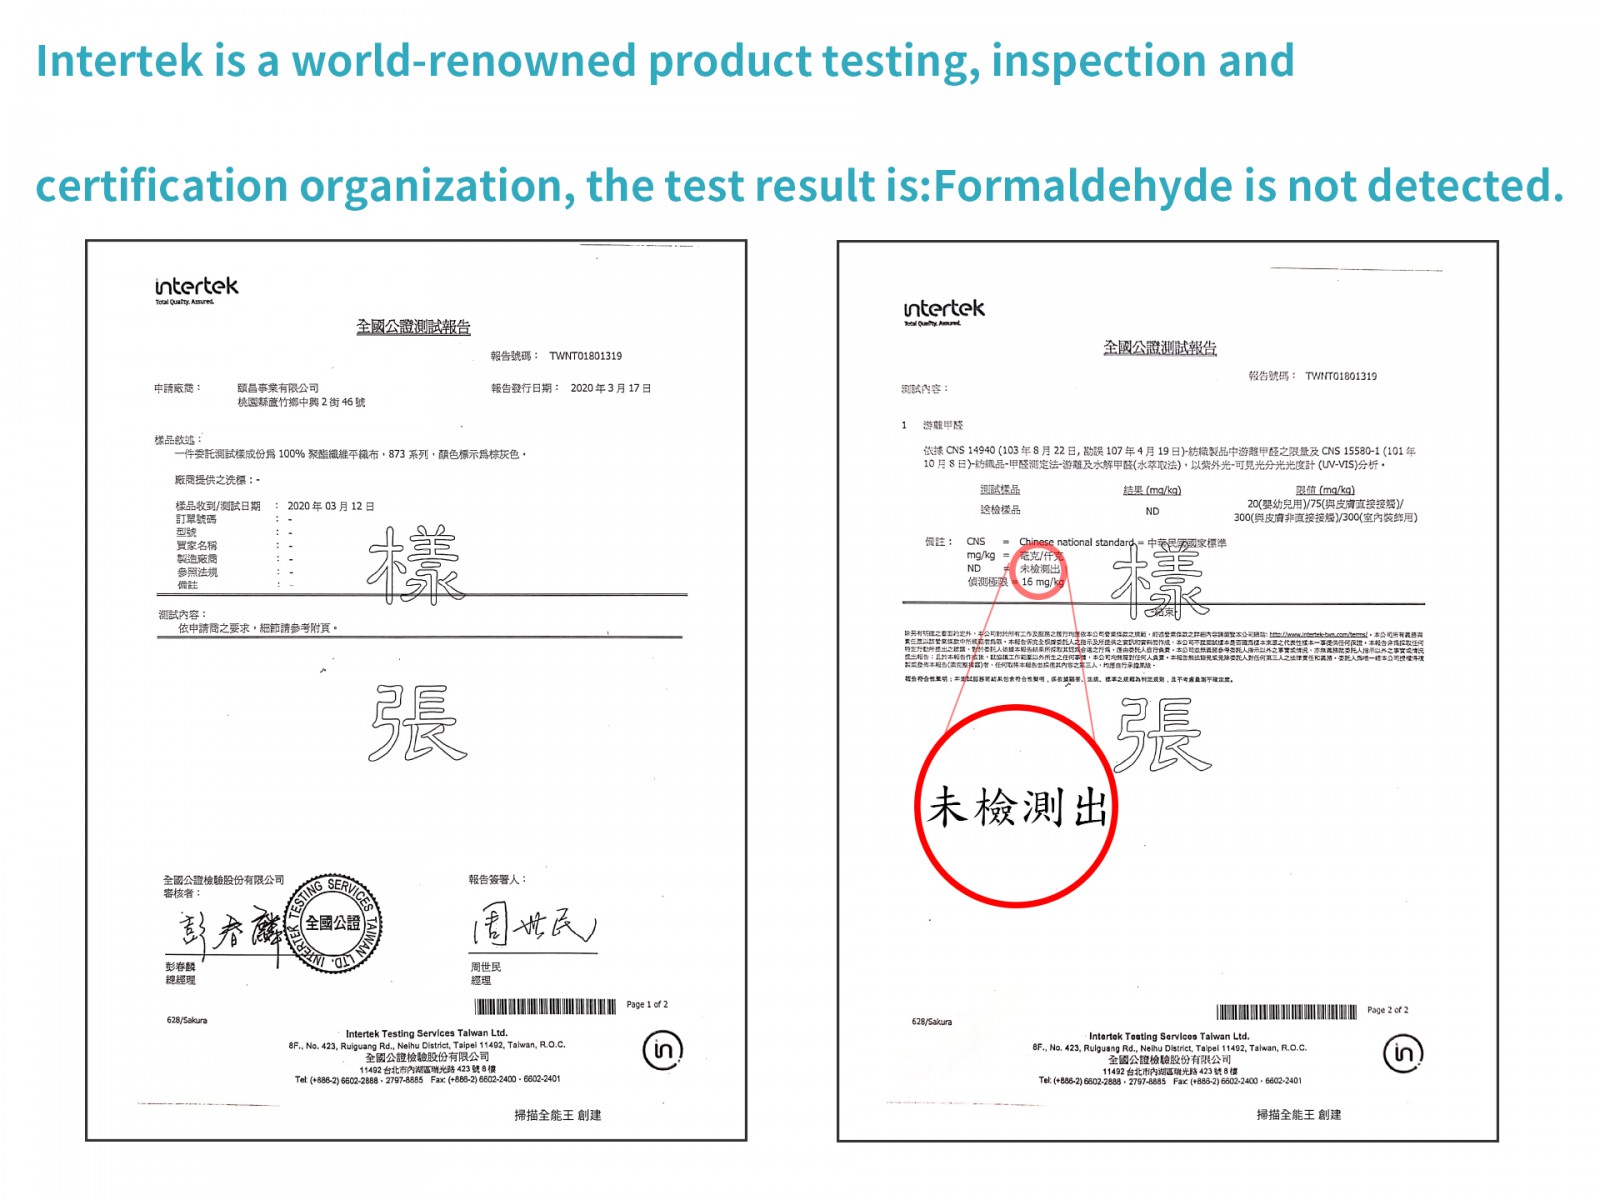 inspection and certification that formaldehyde is not detected